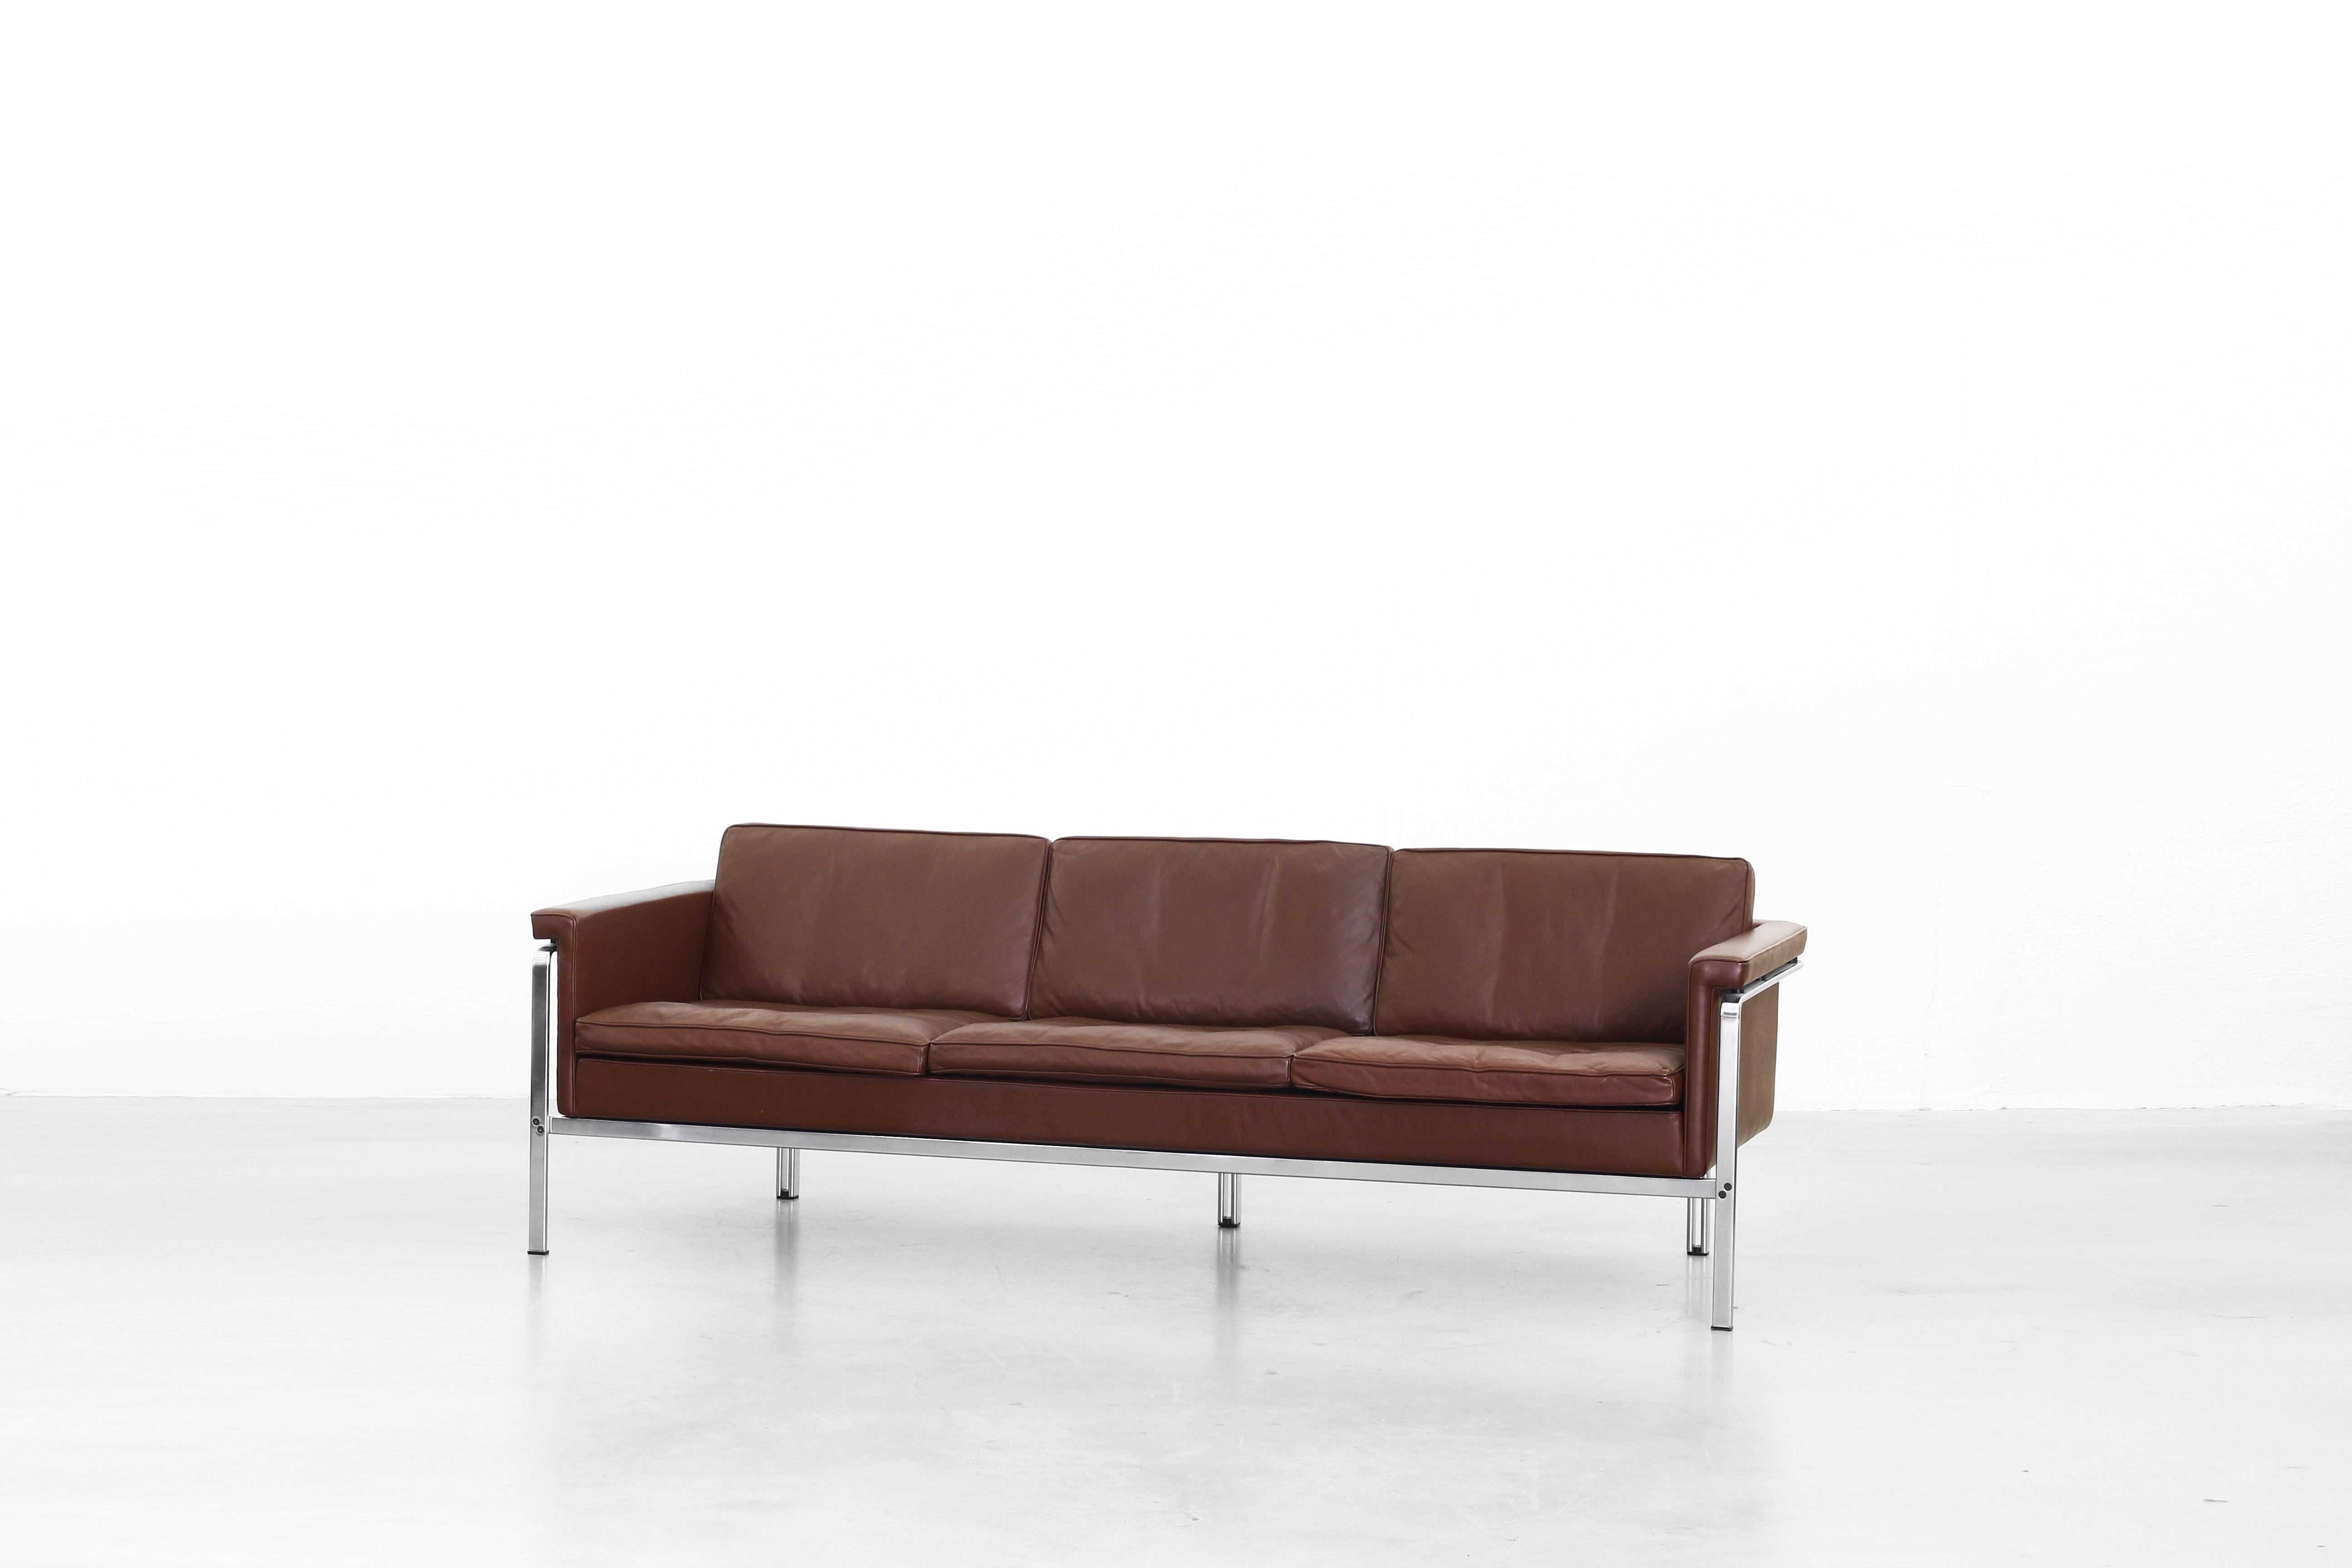 Sofa by Horst Bruning for Alfred Kill International Leather, 1968 (Deutsch)